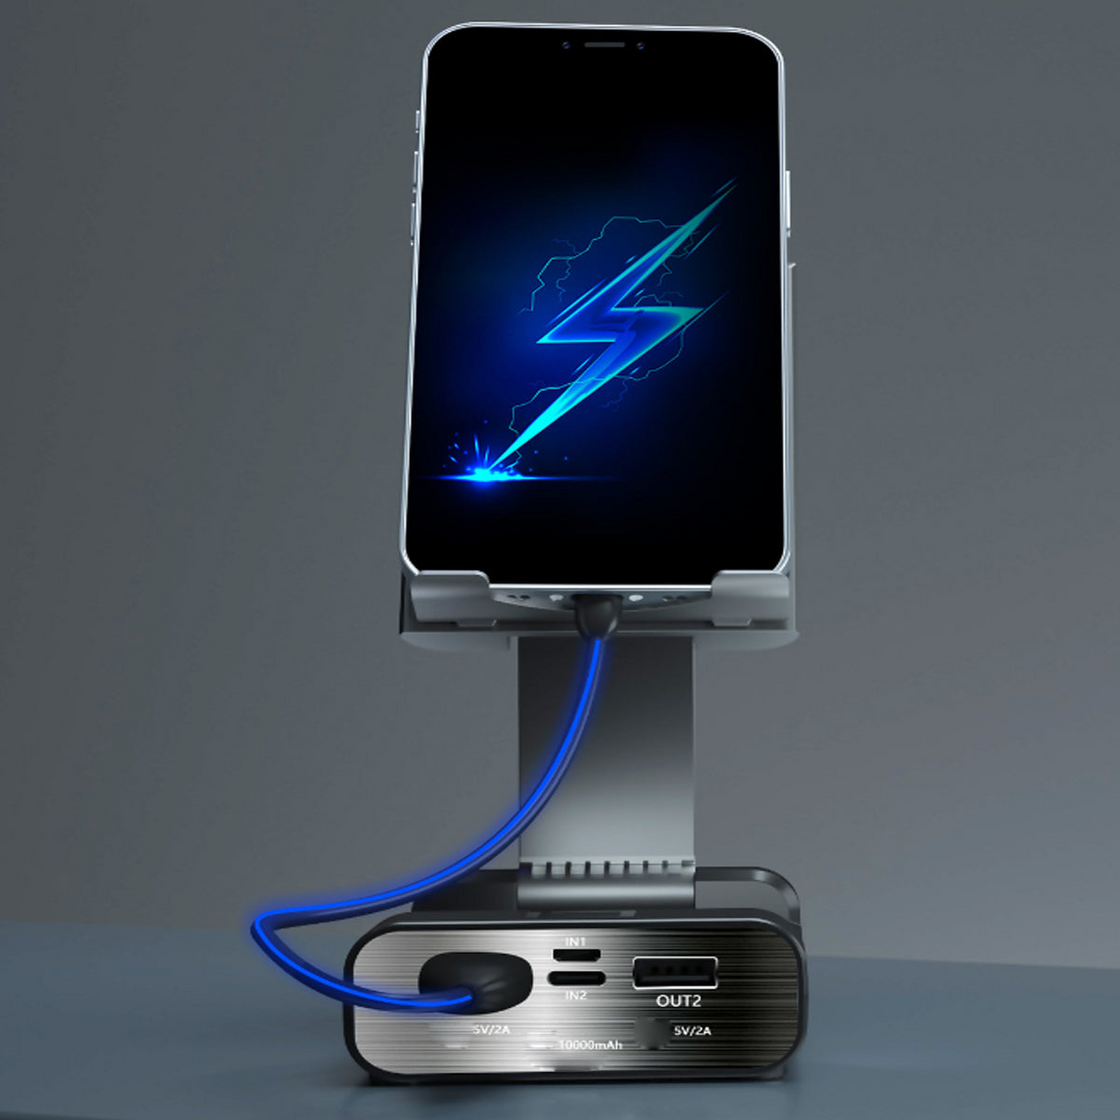 Endurance Power Bank With Stand Holder Foldable And Portable